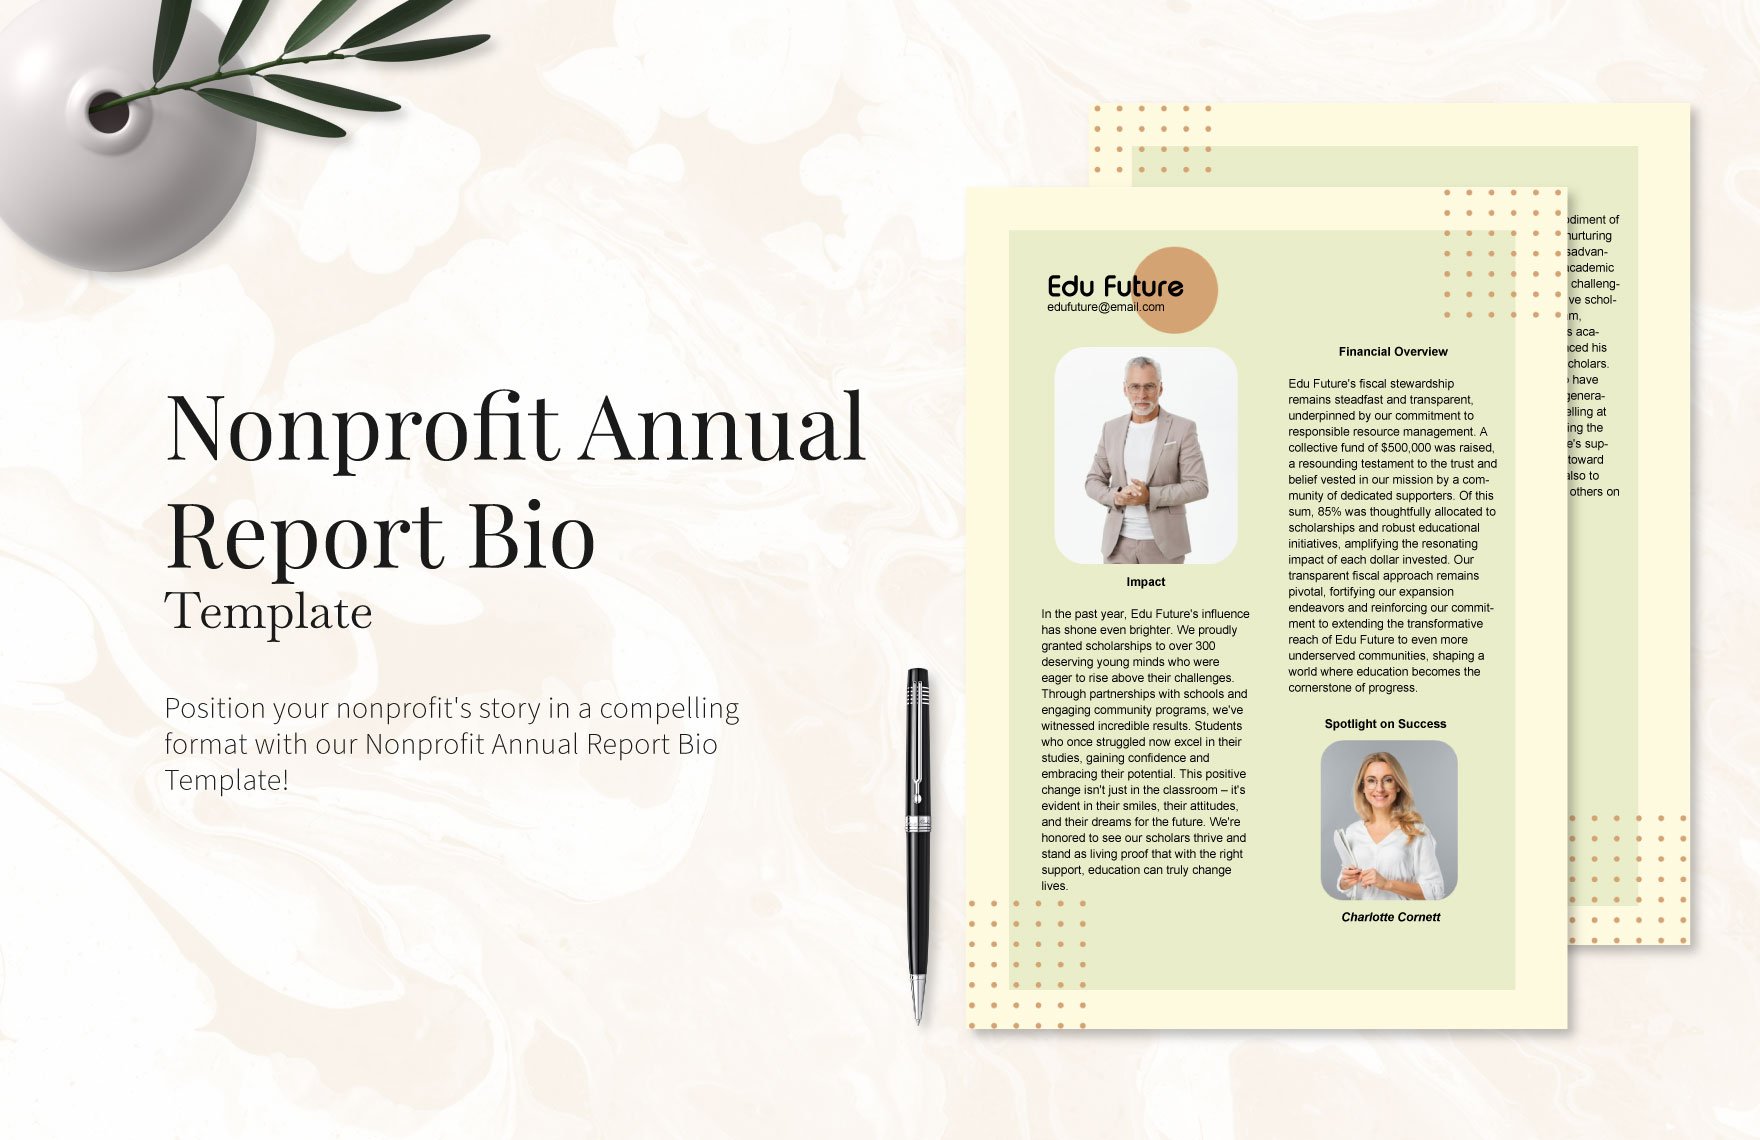 Nonprofit Annual Report Bio Template in Word, Illustrator, PSD, PNG